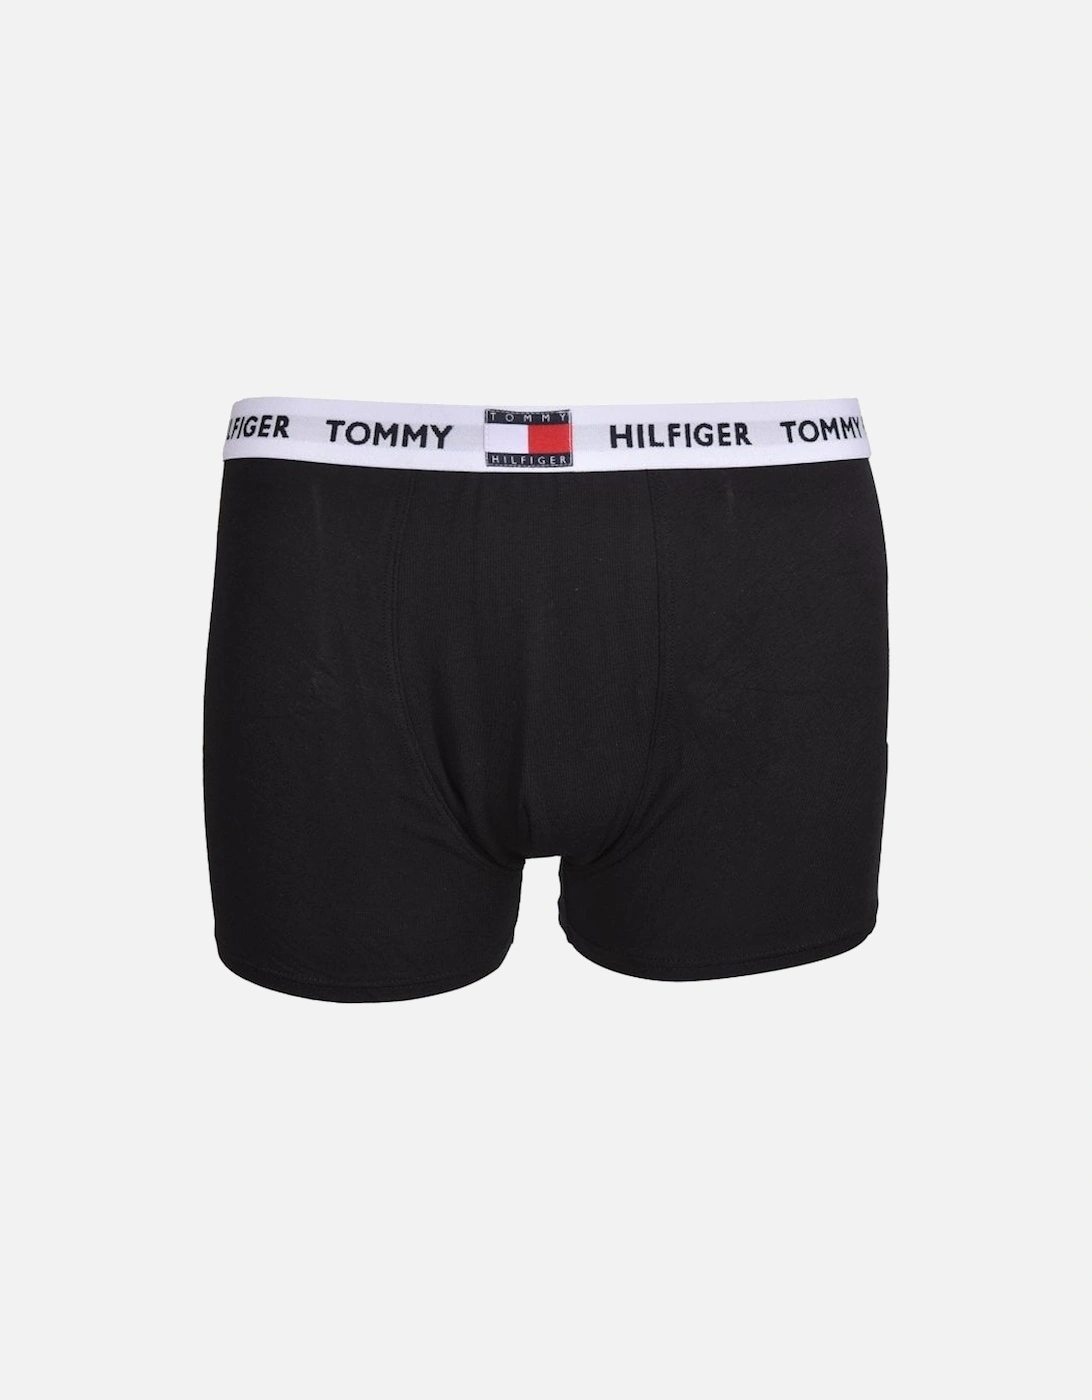 2-Pack Recycled Cotton Luxe Logo Boys Boxer Trunks, Black/Grey